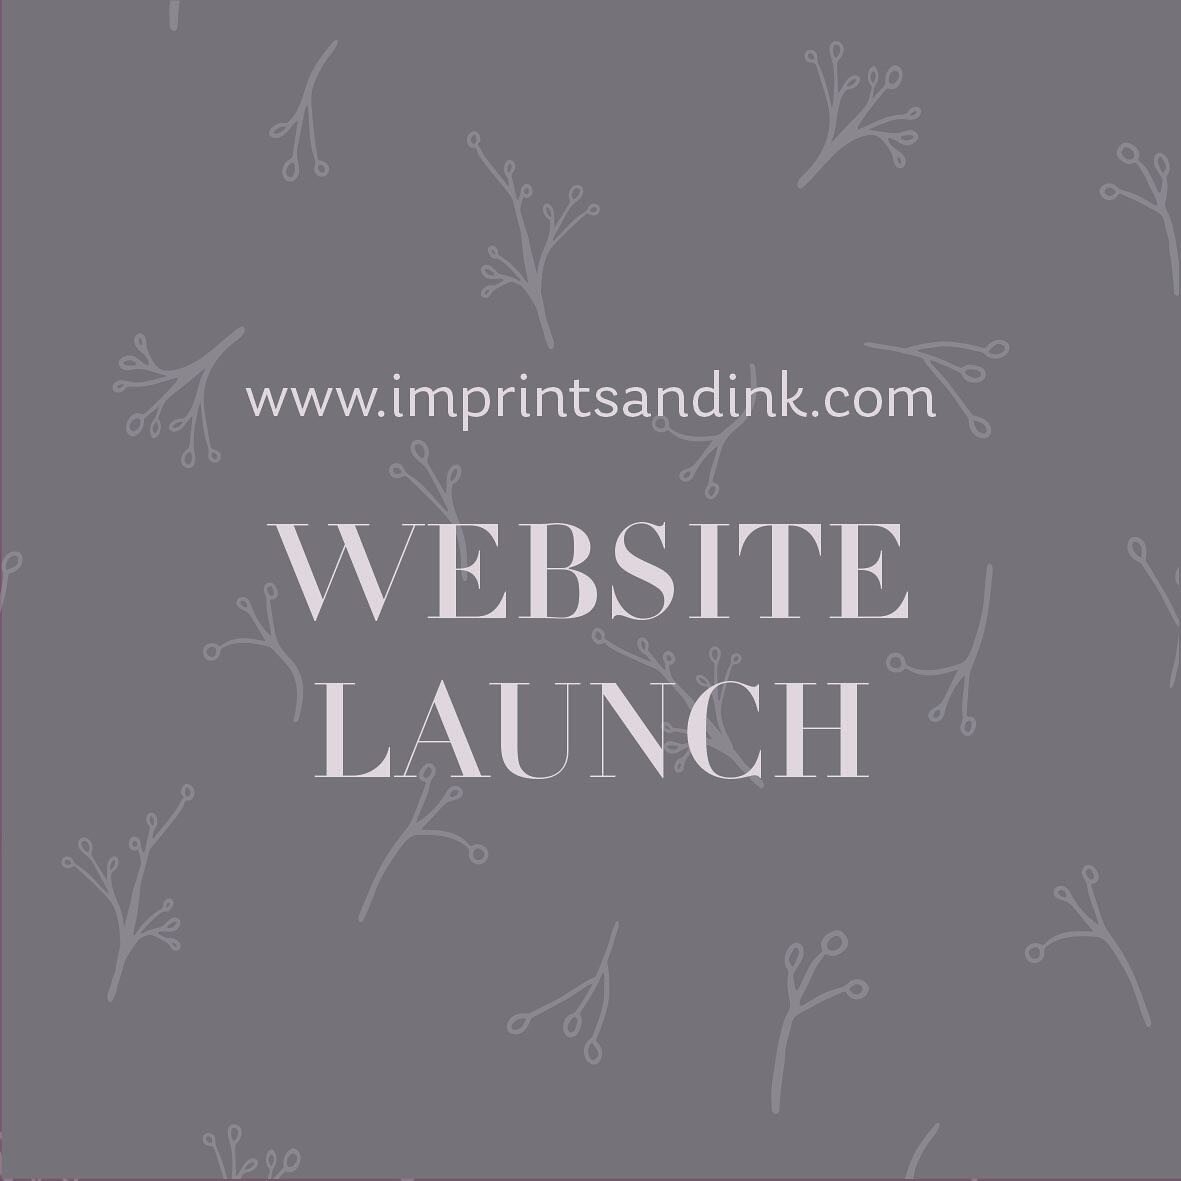 My website is now live! Check out www.imprintsandink.com to discover my first collection, &ldquo;Rare Treasures&rdquo;.

My silk scarf designs are inspired by the beauty of Ireland&rsquo;s native plants. The &ldquo;Rare Treasures&rdquo; collection sh